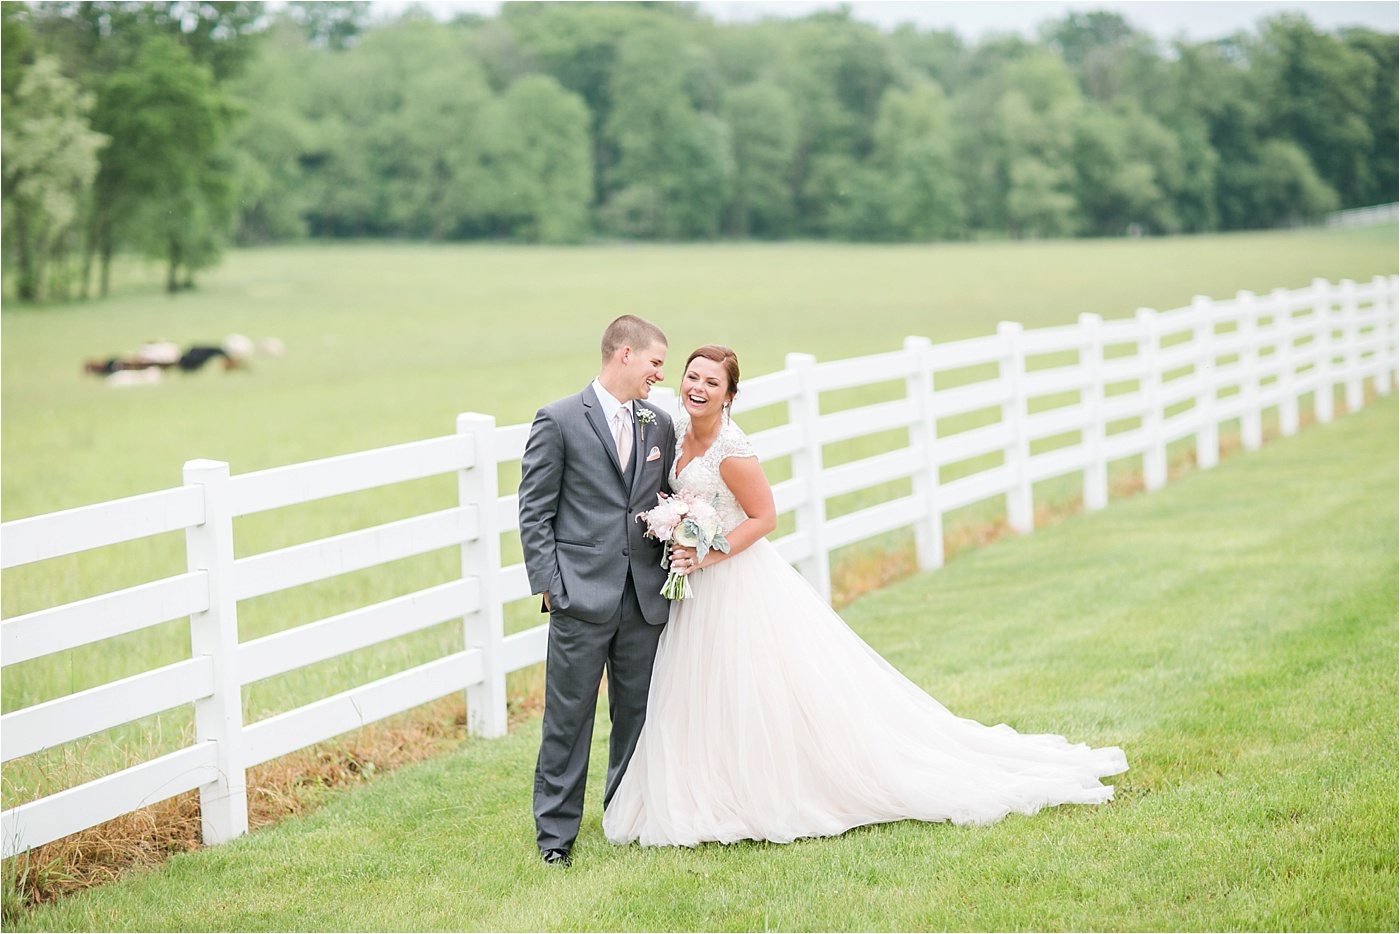 A Blush Outdoor wedding at Irongate Equestrian | KariMe Photography_0128